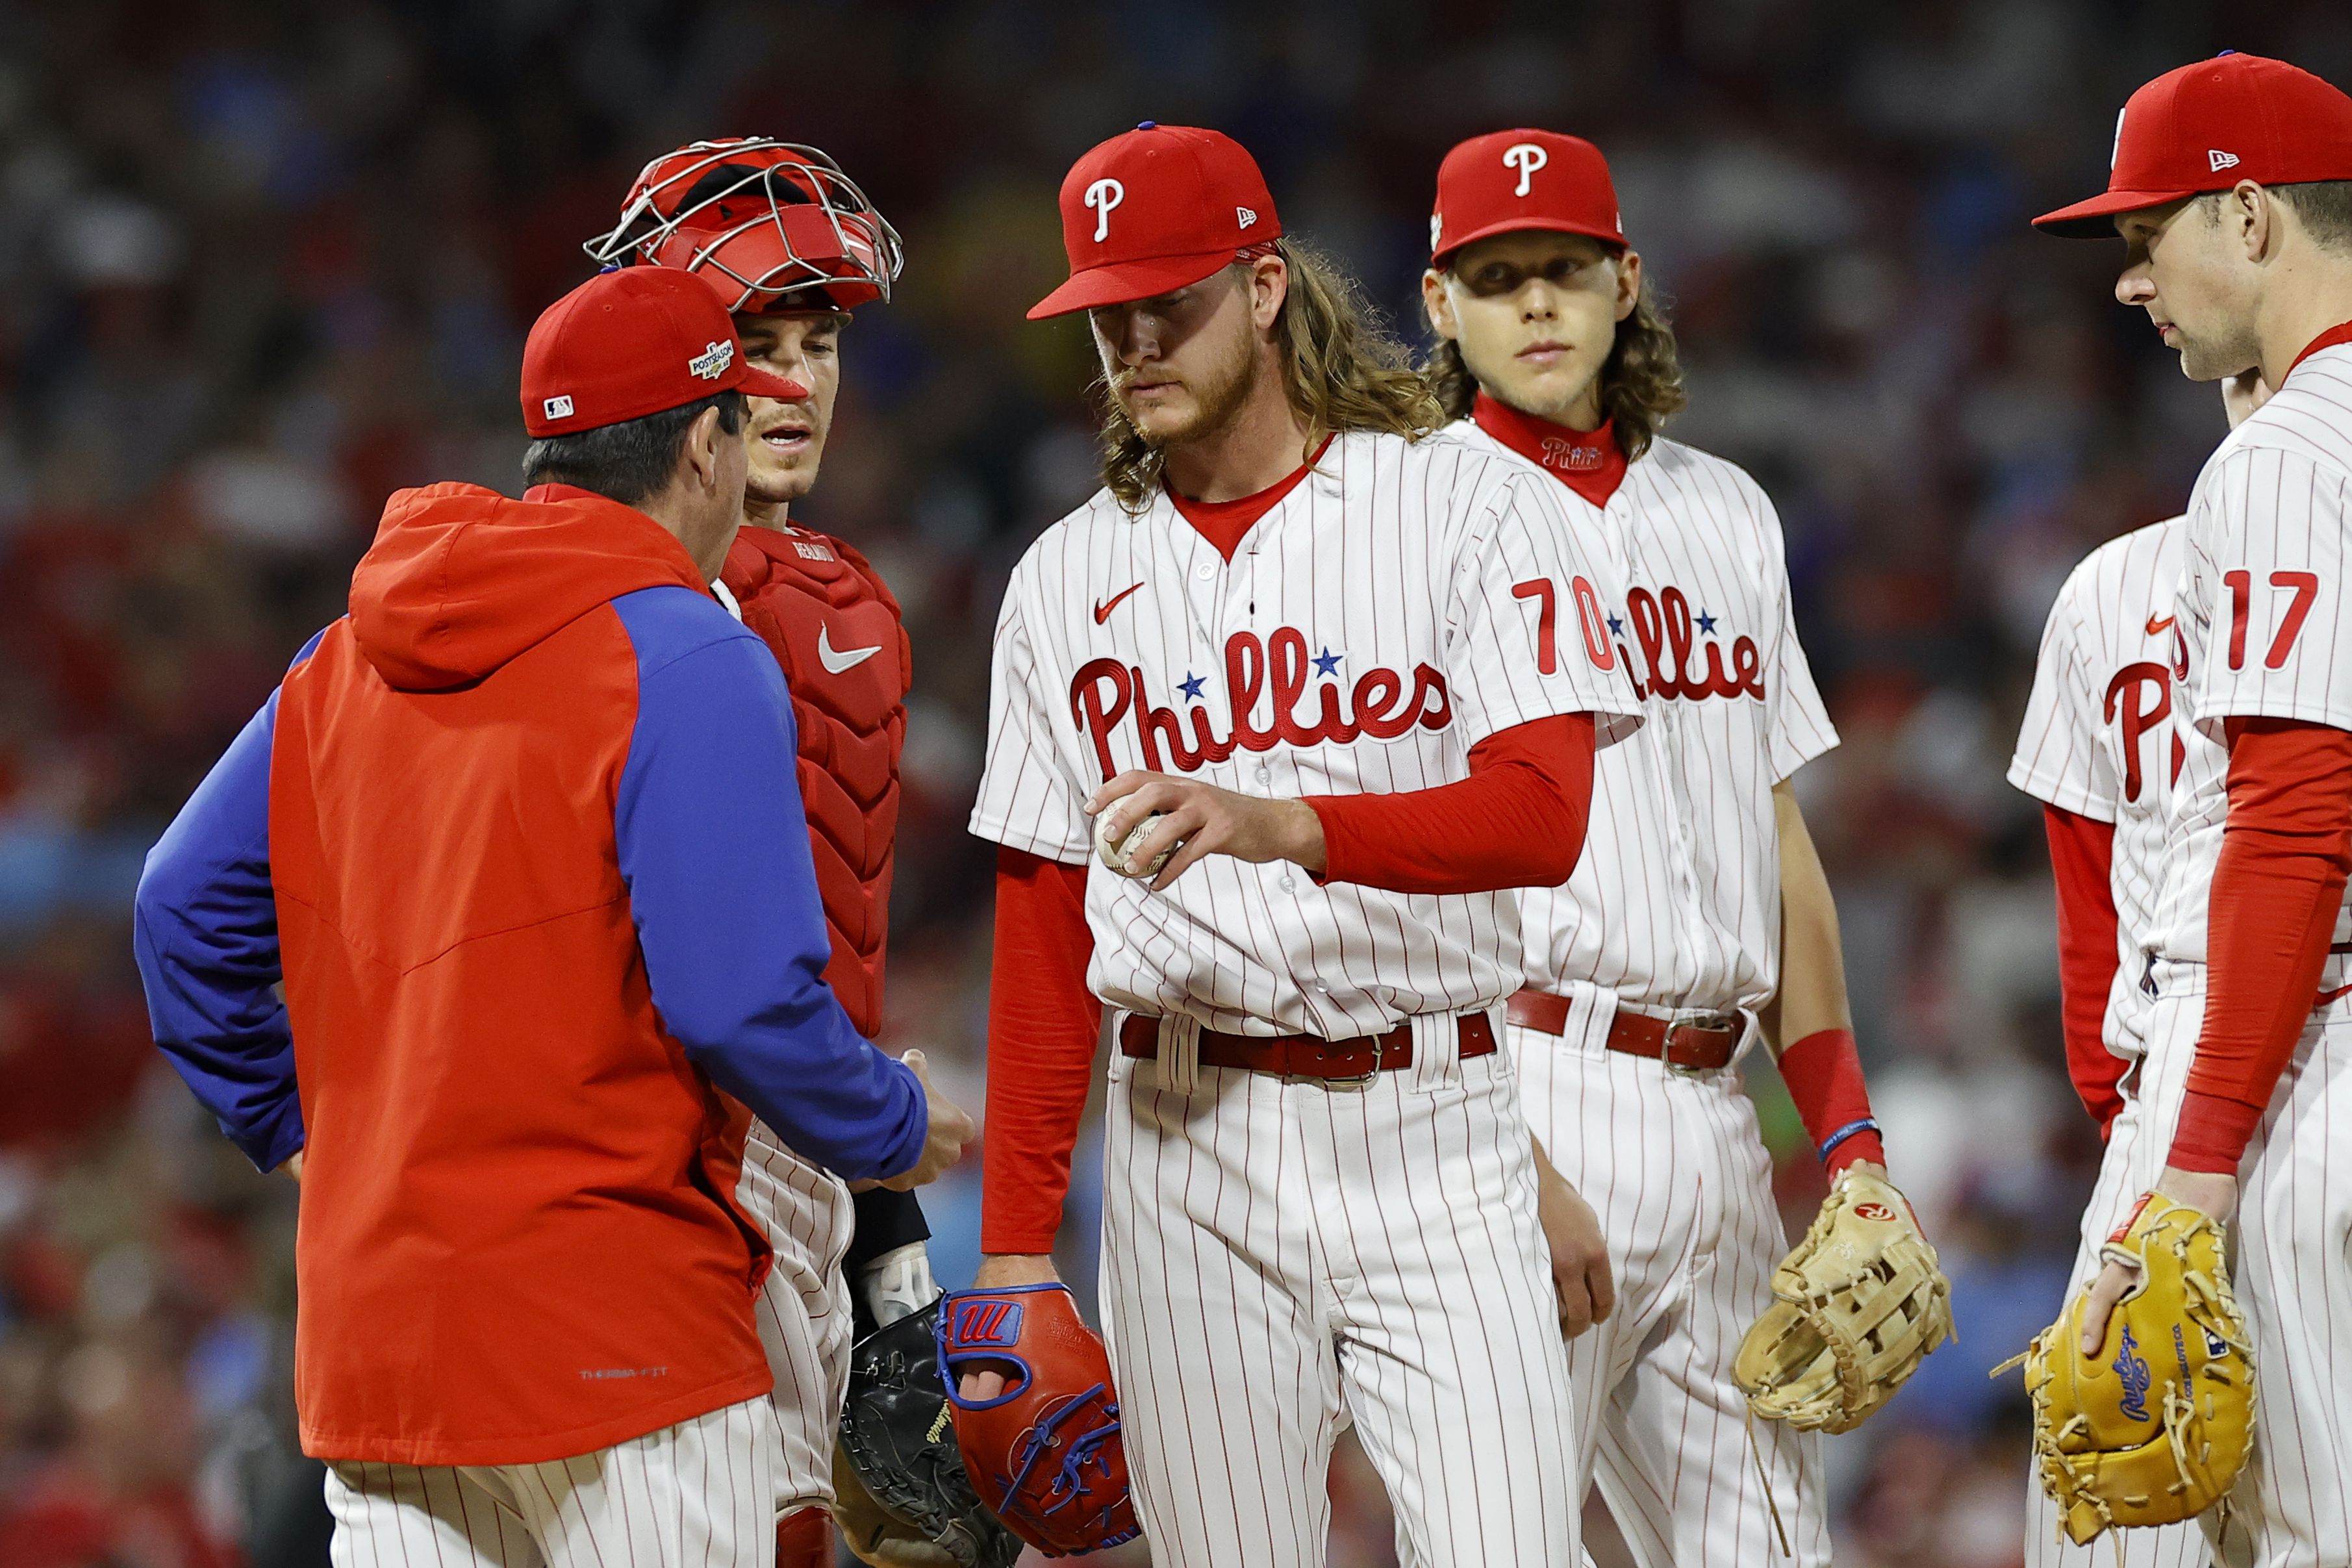 Phillies – Padres: Rhys Hoskins skips after home run, fans love it